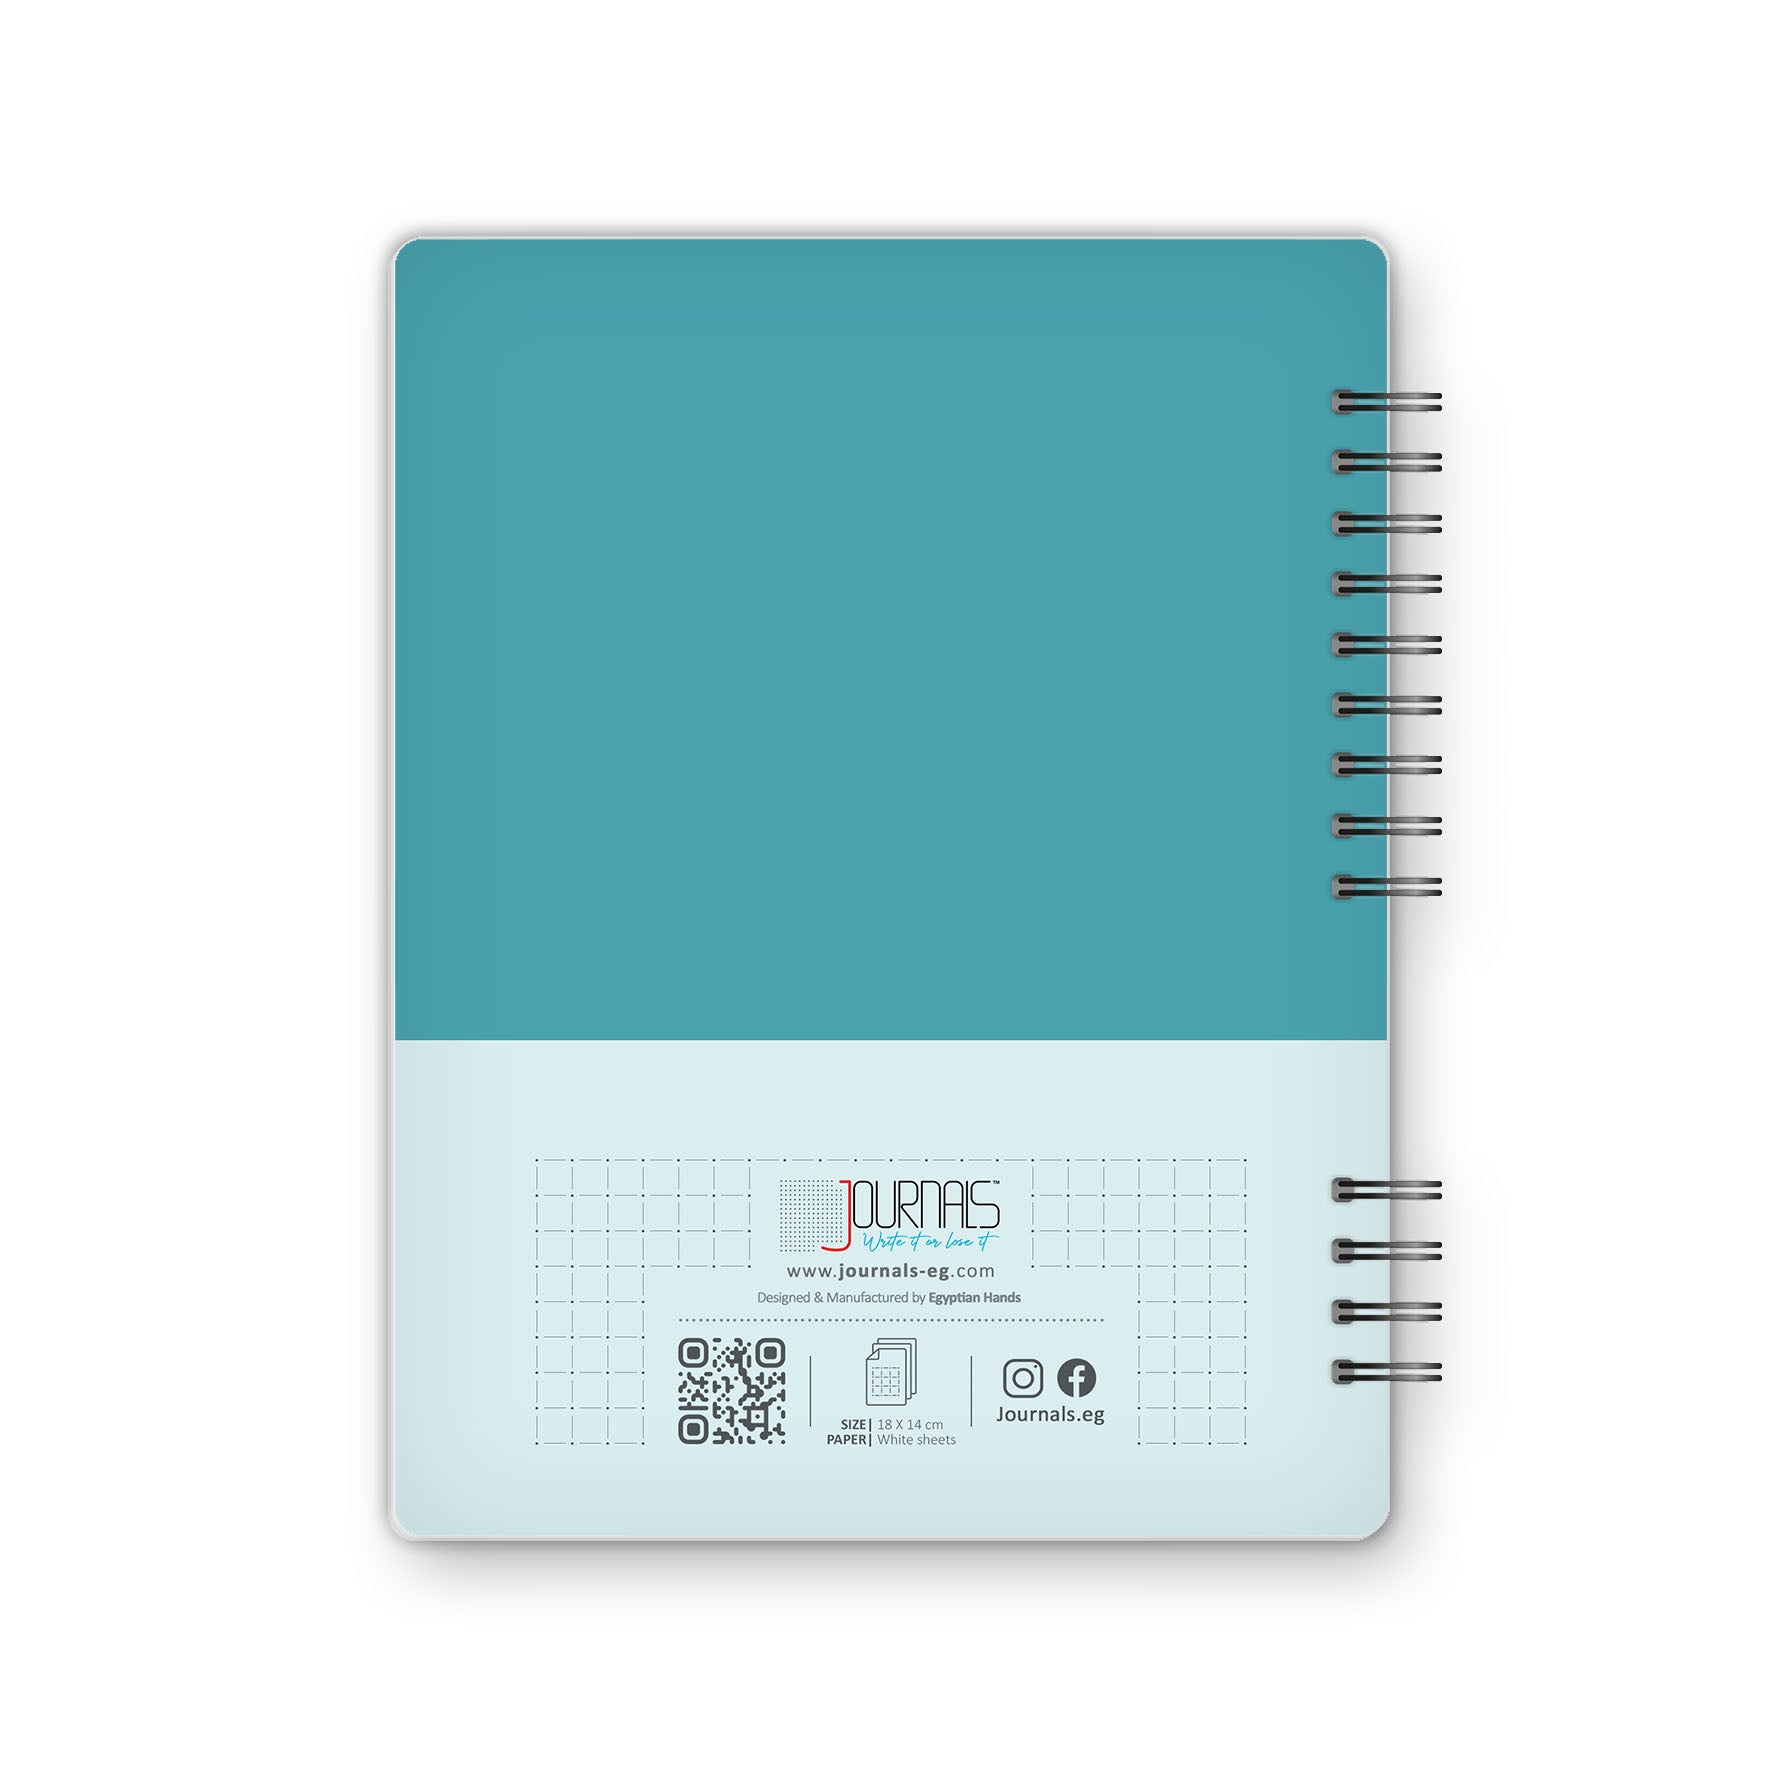 Dots Grid - 18X14 cm - 75 Sheets | Teal - from Journals